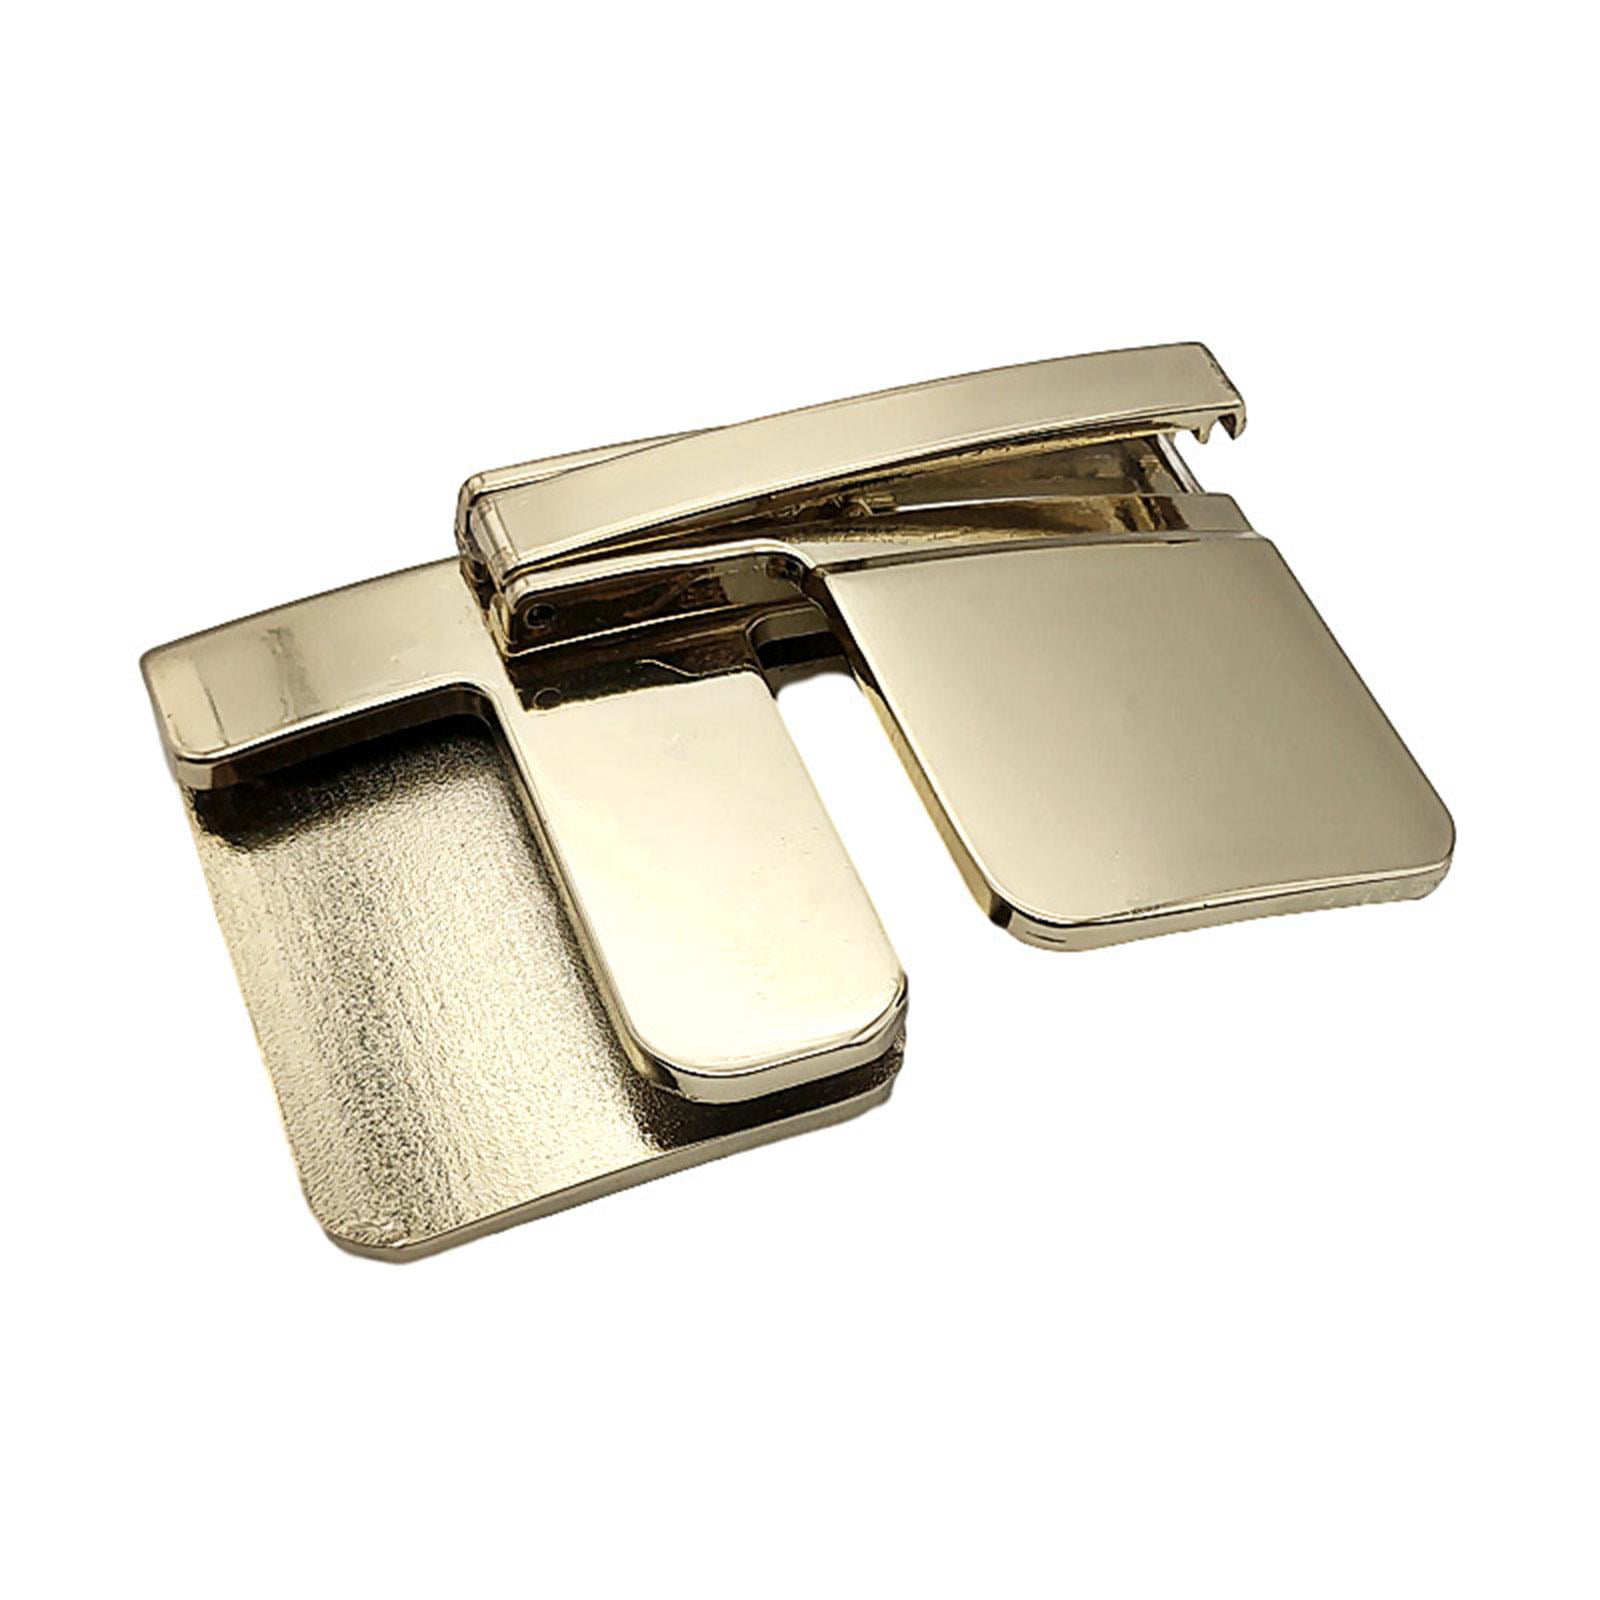 Belt Clip Buckle - Multi-Function Belt Clip Buckle,Pants Clips to Tighten  Waist,Pant Clips for Waist Tightener,Belt Clips for Pants,Waist Adjuster  for Loose Pants,Pant Waist Tightener (2colors) at  Men's Clothing  store